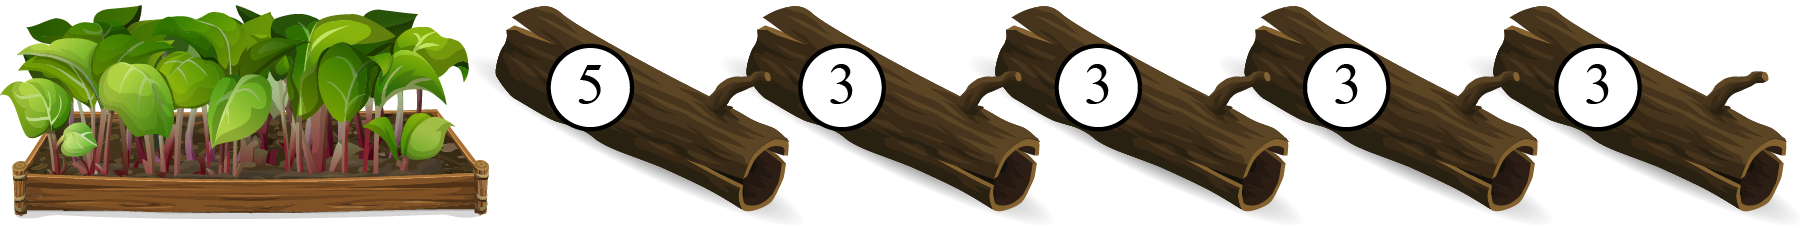 A garden on the left followed by five logs
  side by side with the numbers 5, 3, 3, 3, and 3 from left to
  right.